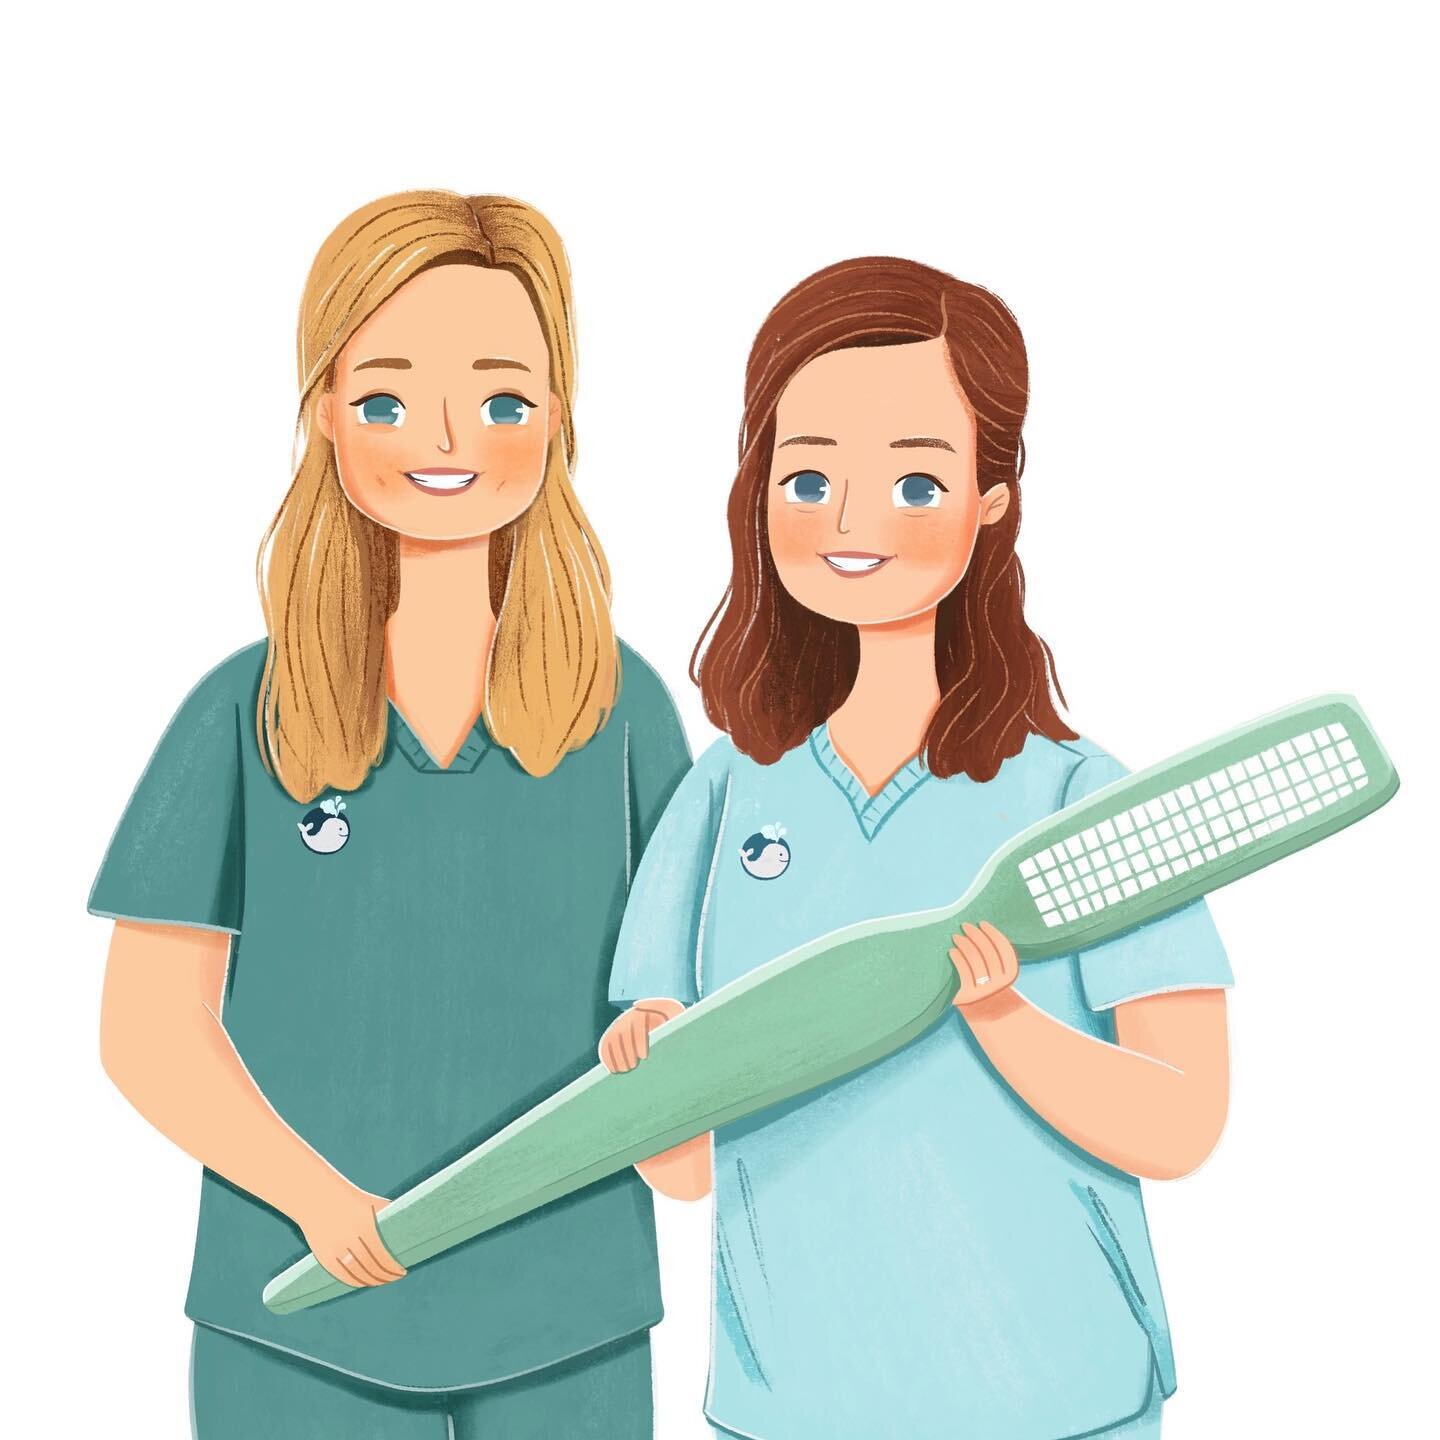 Sisters &amp; Mommas with a passion for Pediatric Dentistry💙
Drs. Beth and Jenn are eager to share their experiences, advice and stories on a blog coming very soon!